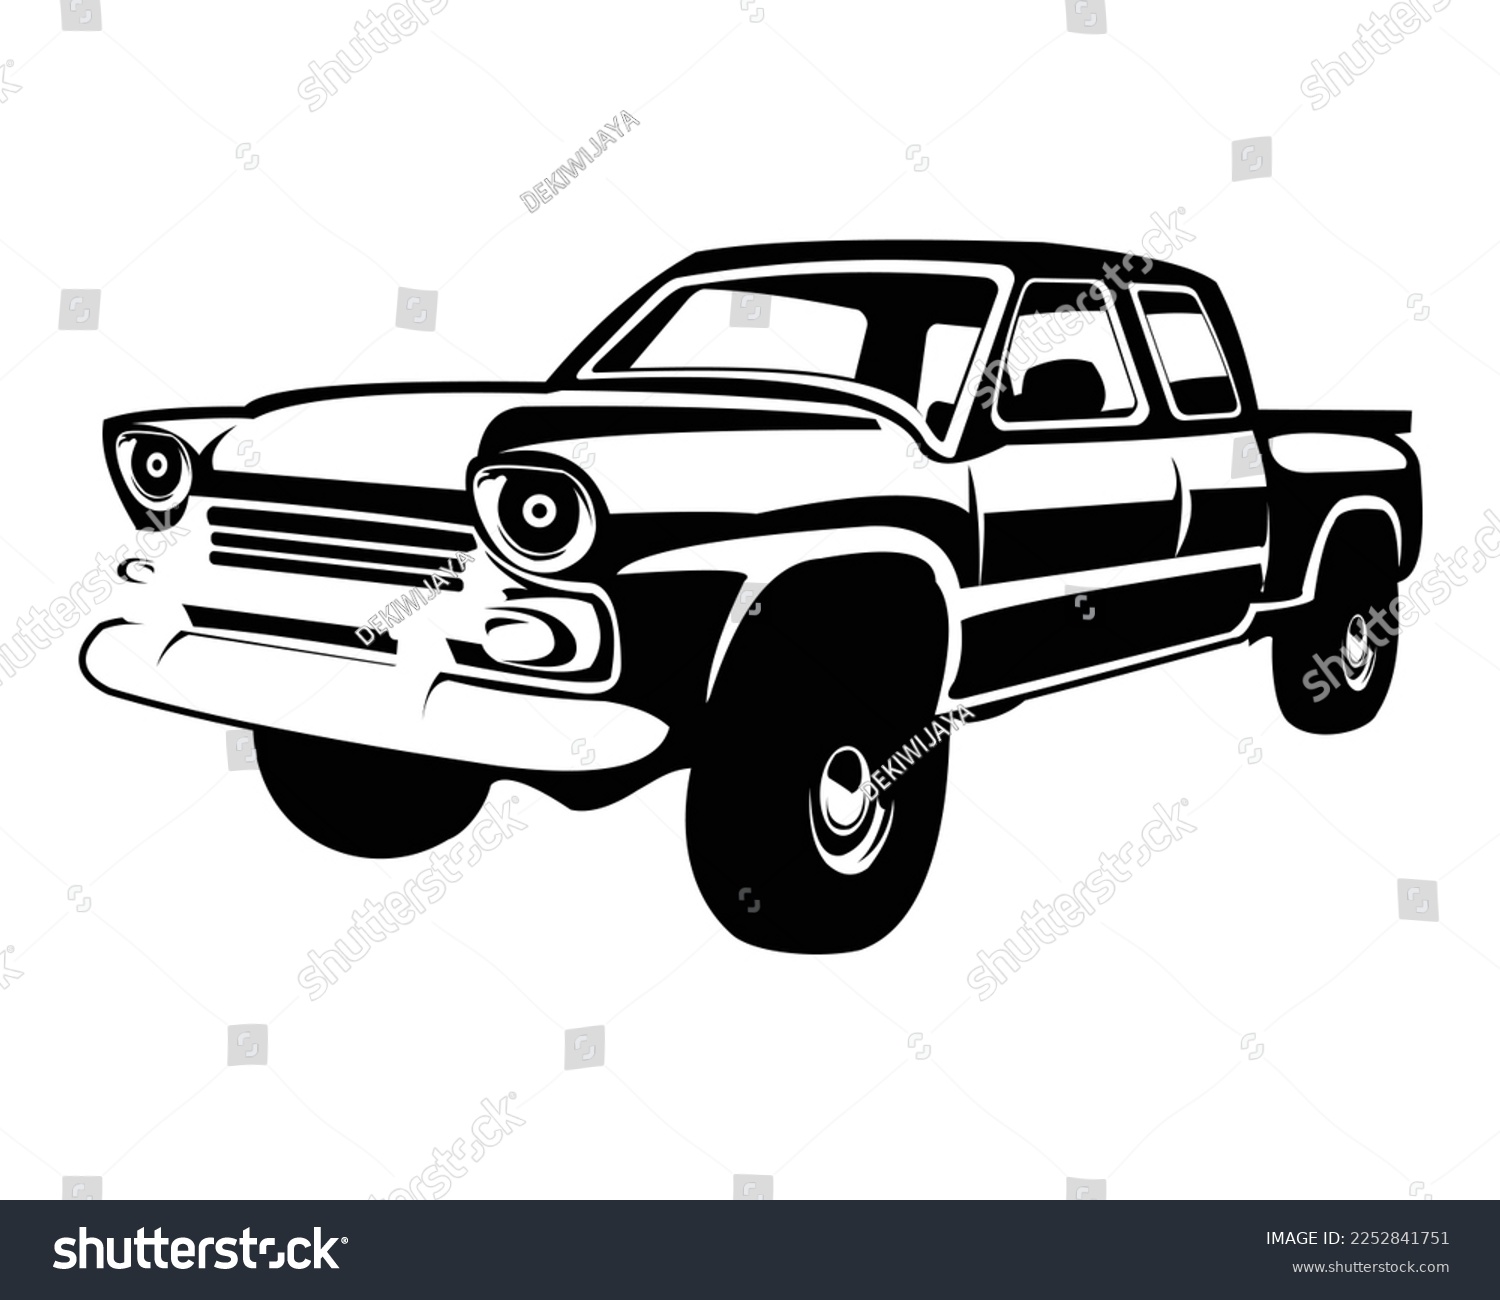 SVG of 1950 chevy truck isolated side view white background. best for logos, badges, emblems, icons, available in eps 10. svg